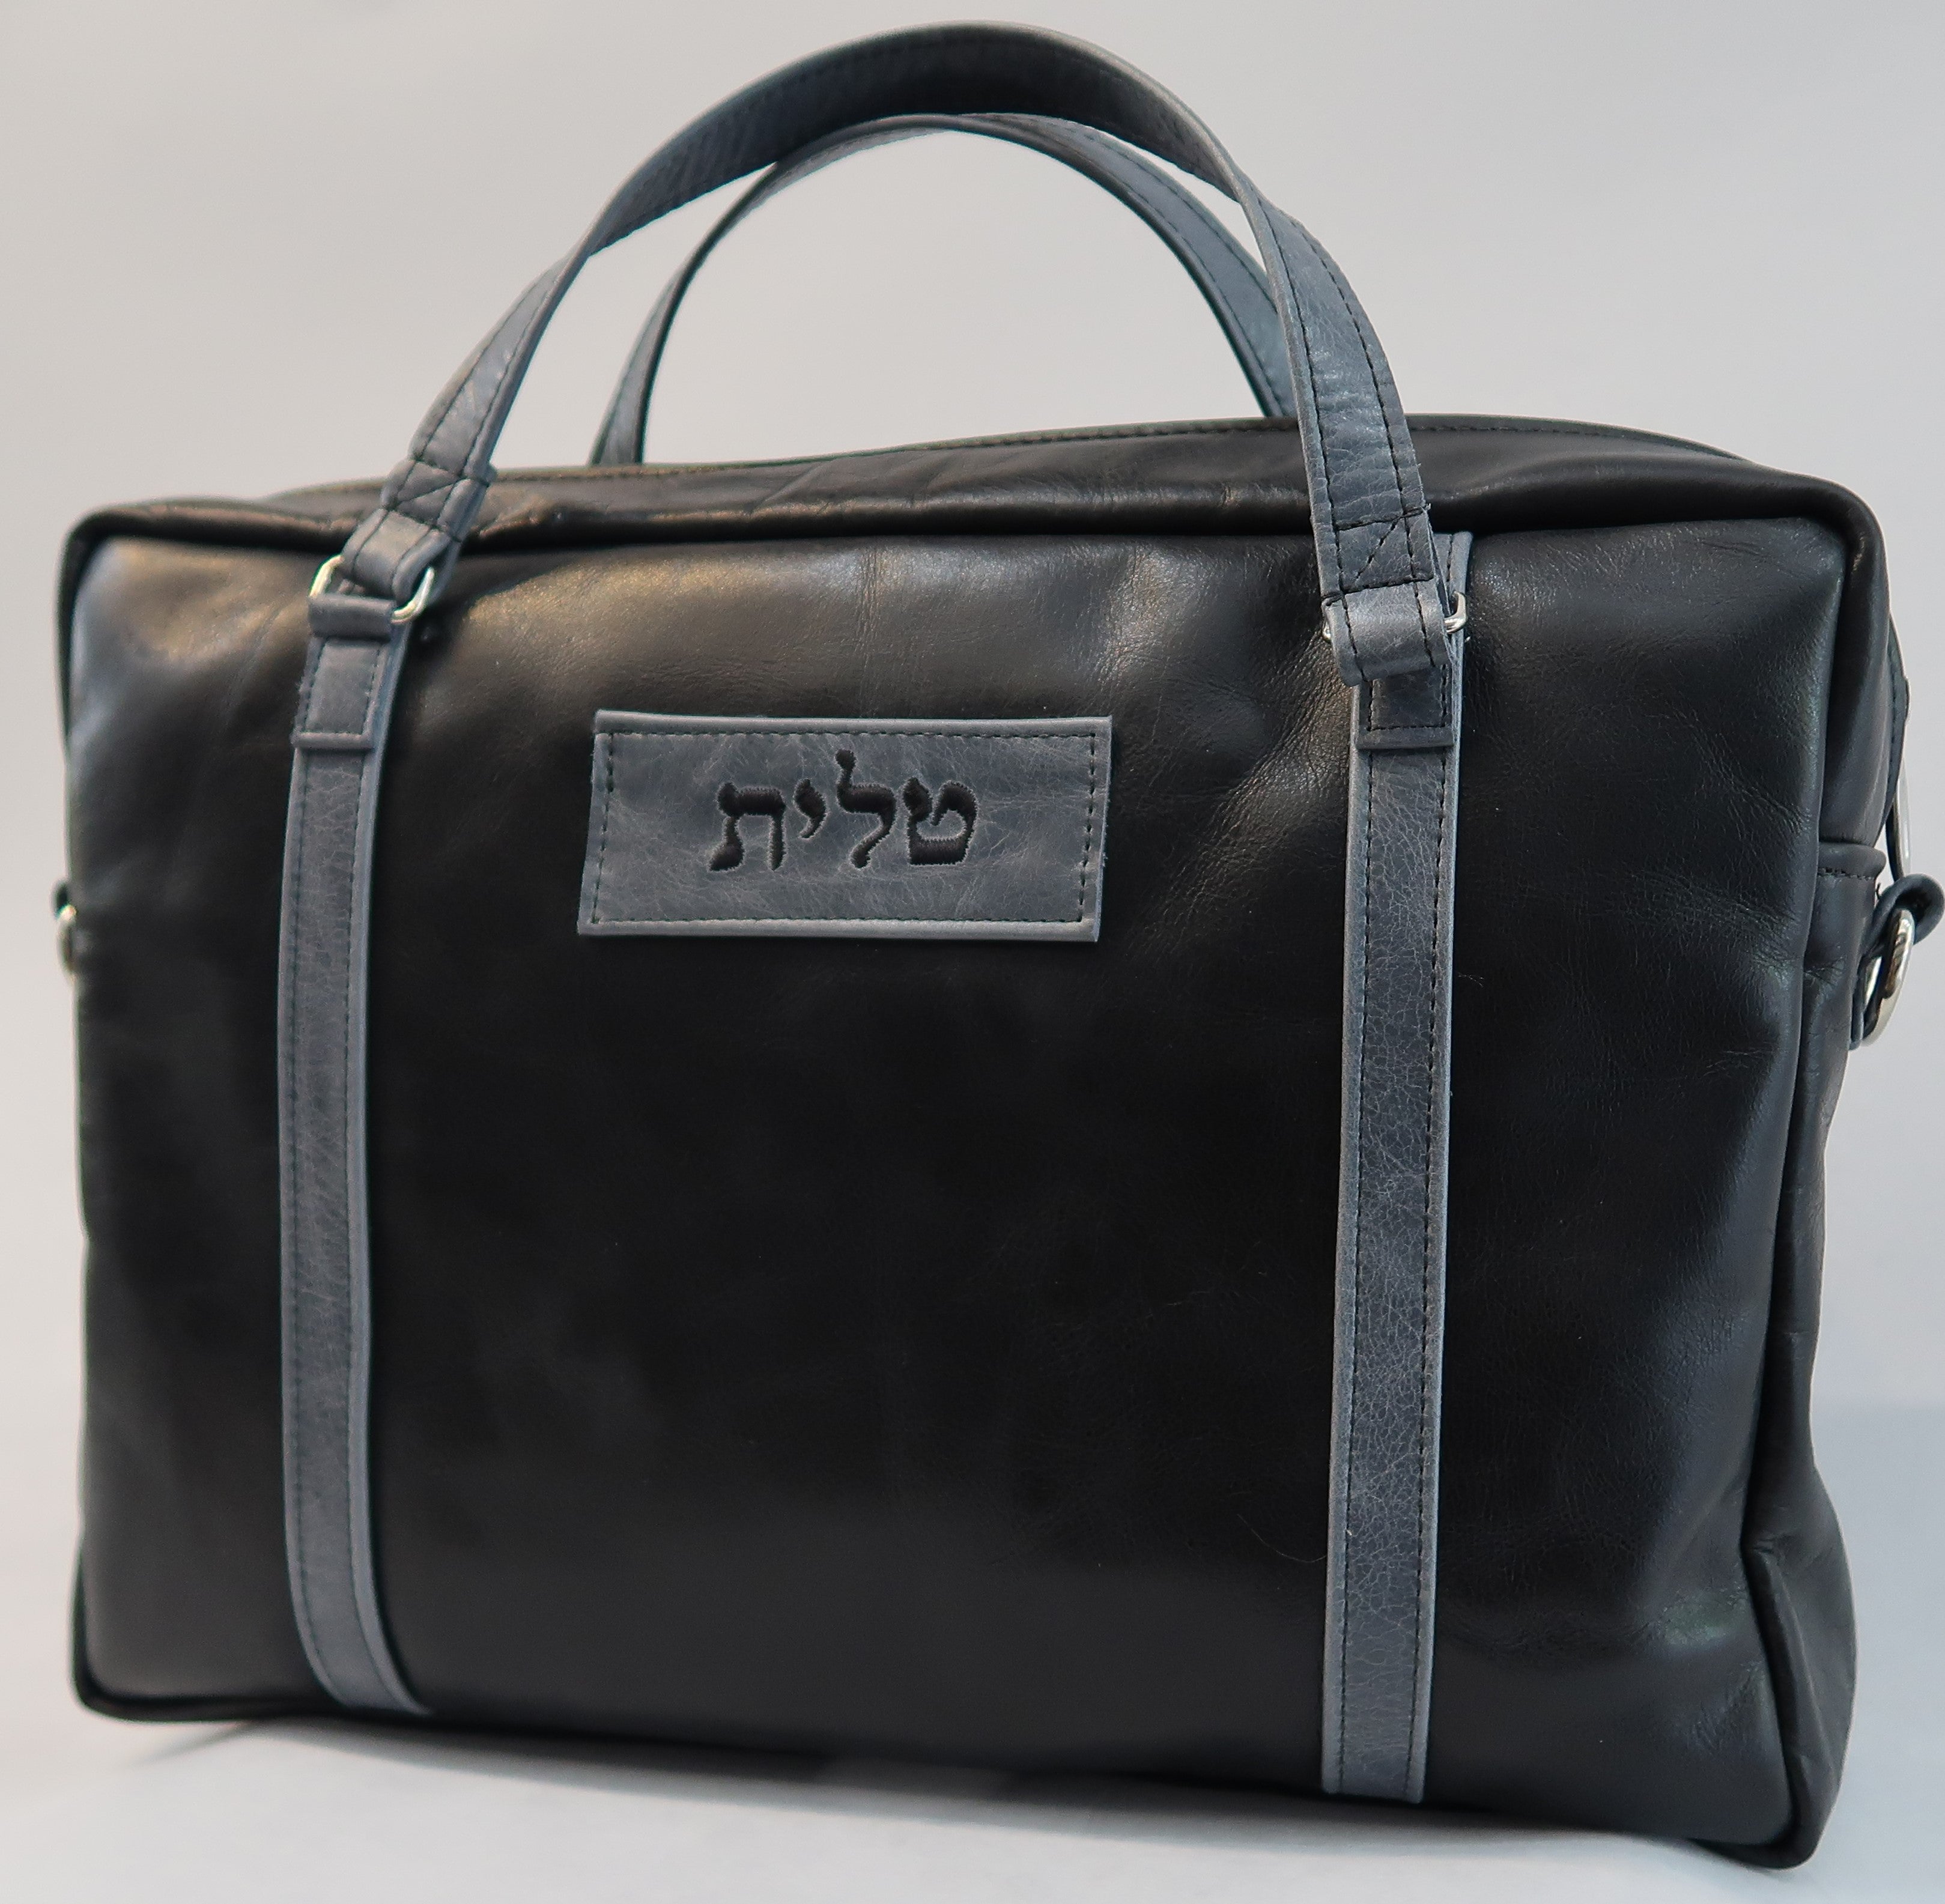 The original 3 dimensional man bag for every day use.